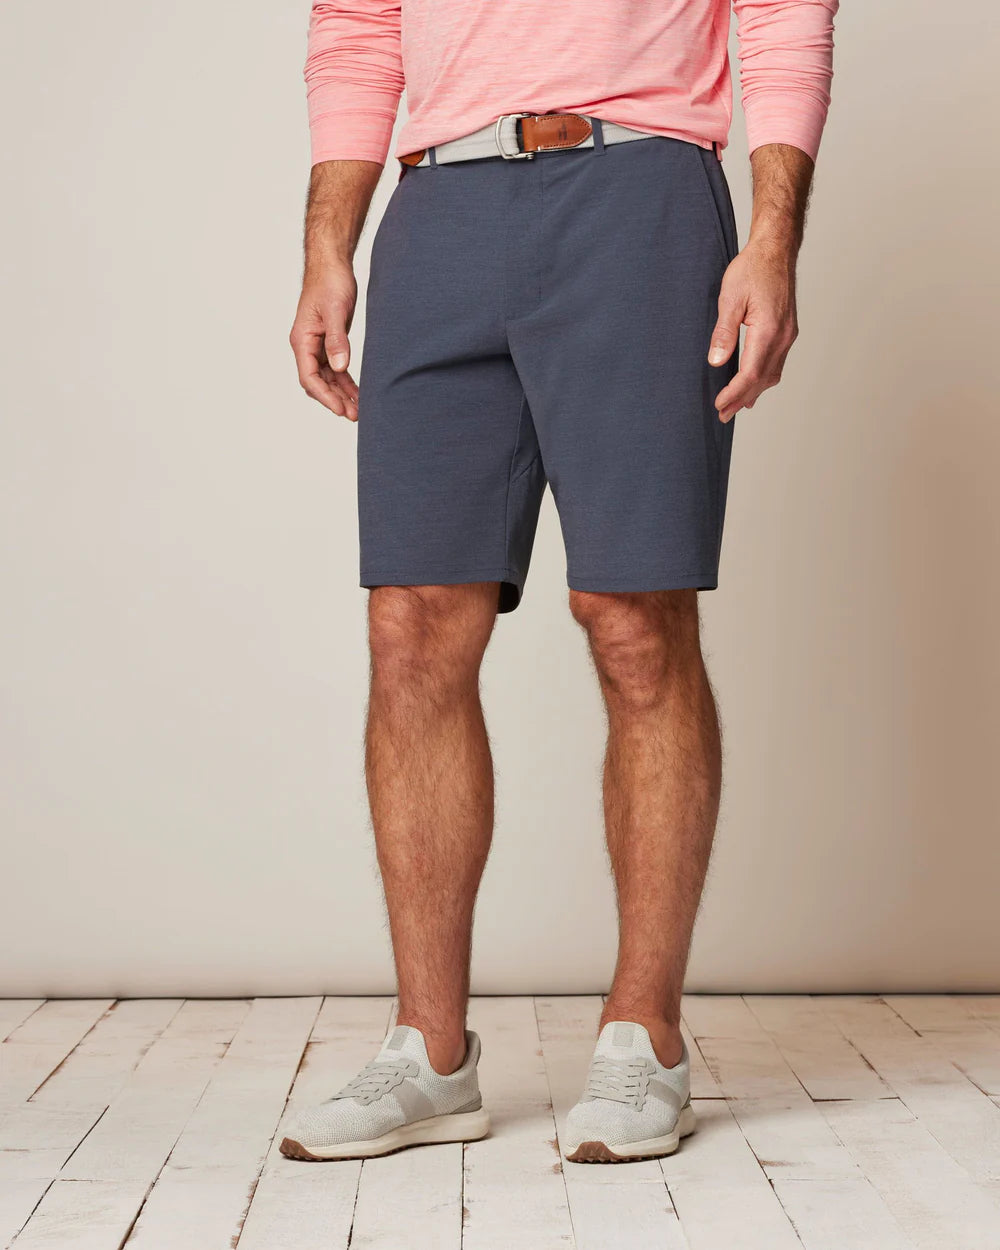 Men's Shorts – Broderick's Clothing Co.